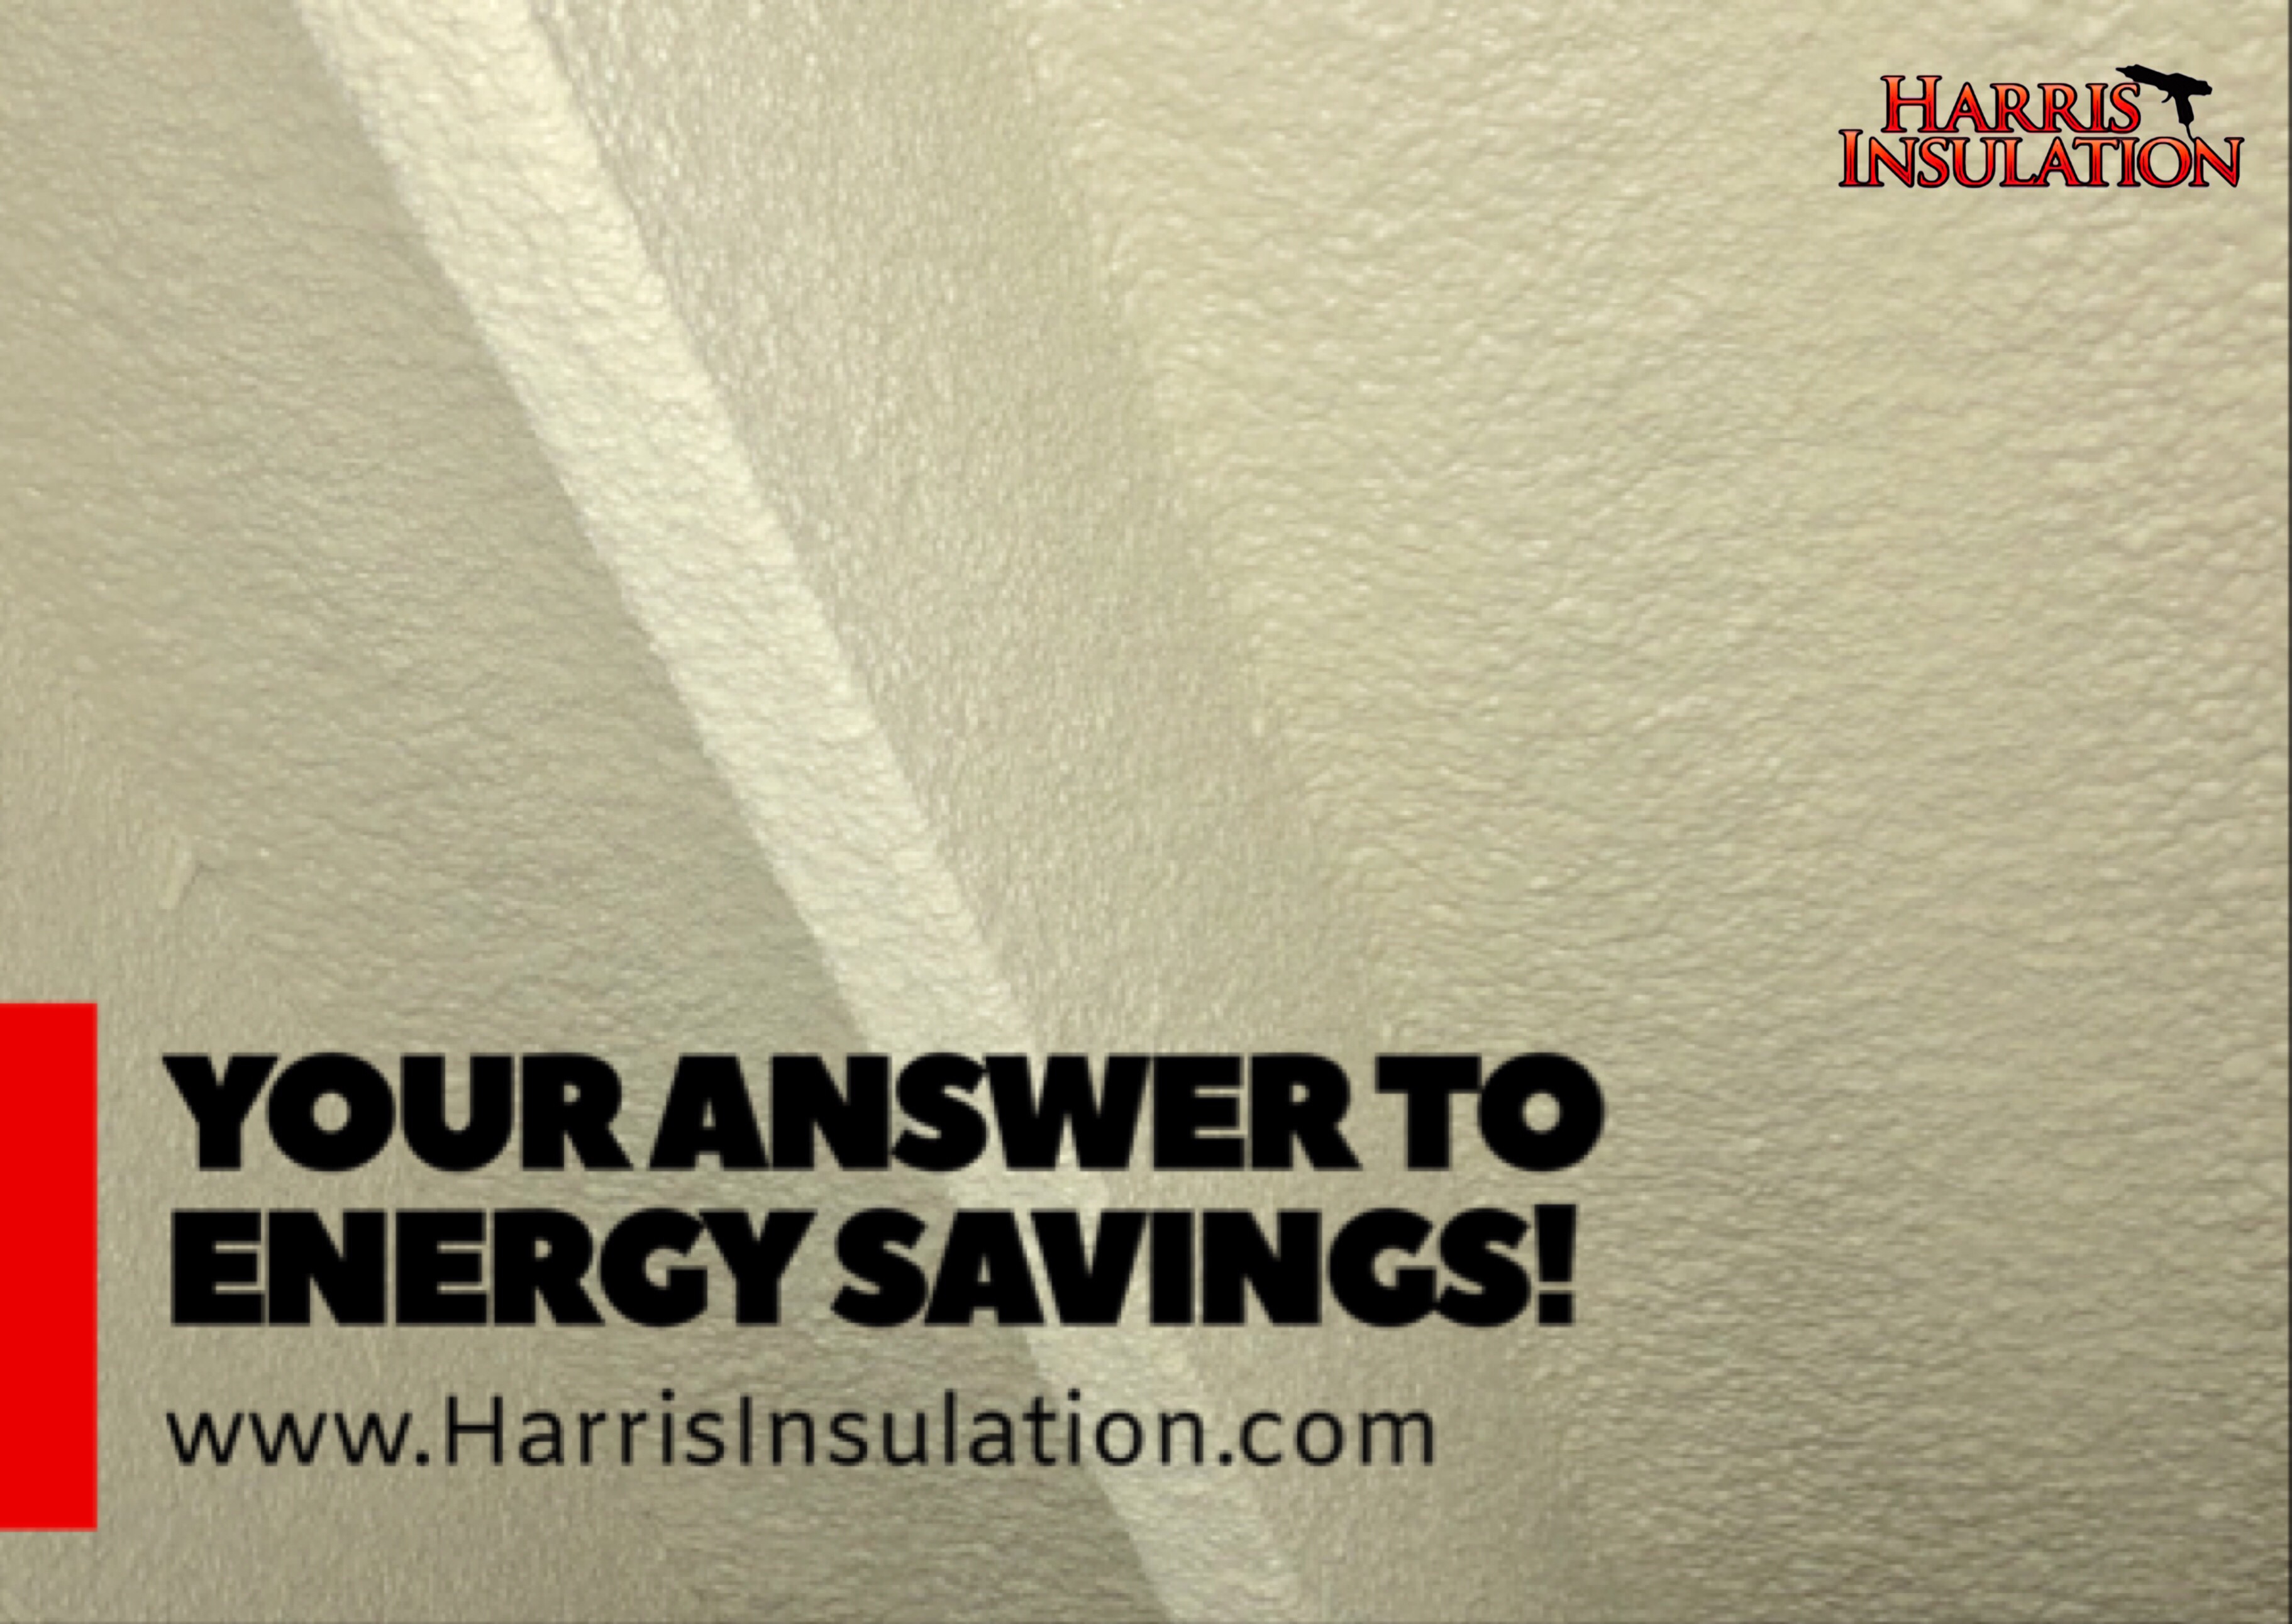 Your answer to energy savings